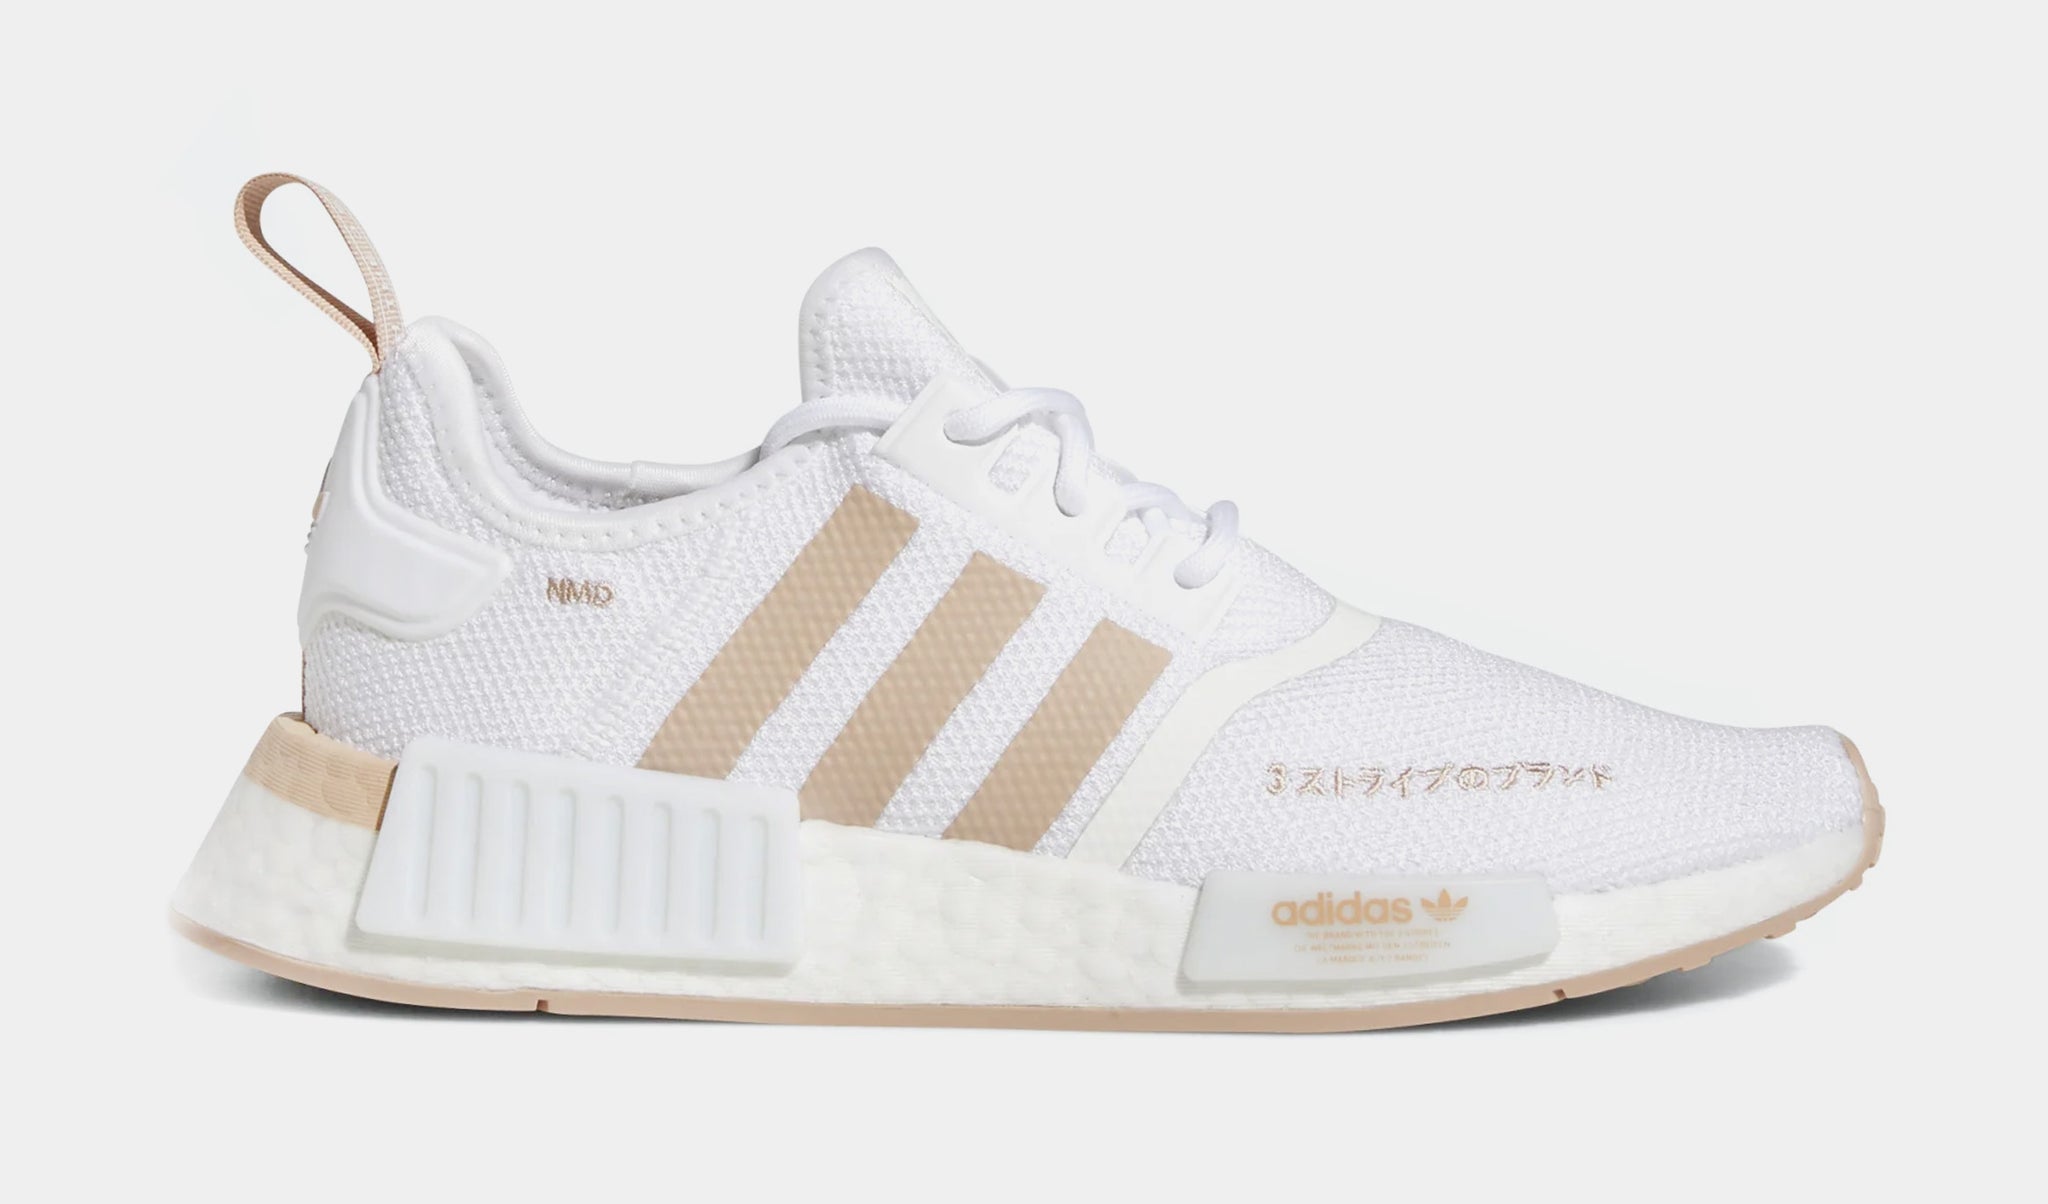 adidas NMD R1 Womens Lifestyle Shoes White Beige HQ2071 – Shoe Palace